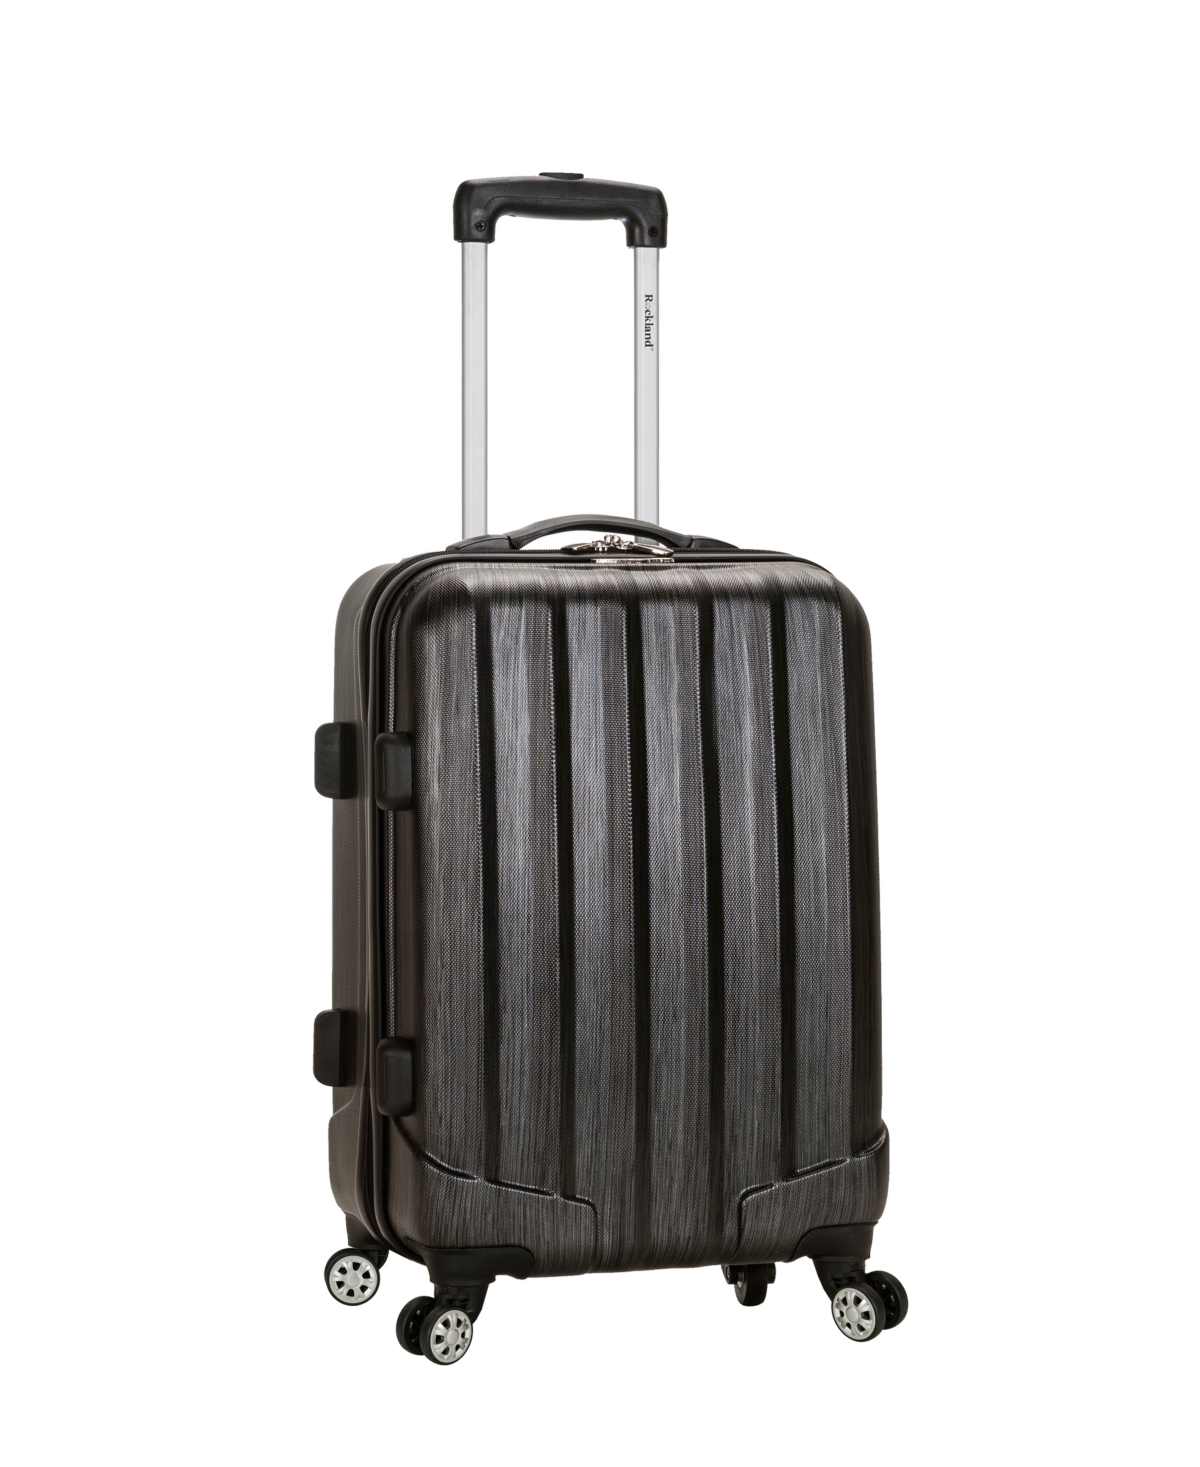 Melbourne 20" Hardside Carry-On Spinner - Two-Toned Pink  Mint